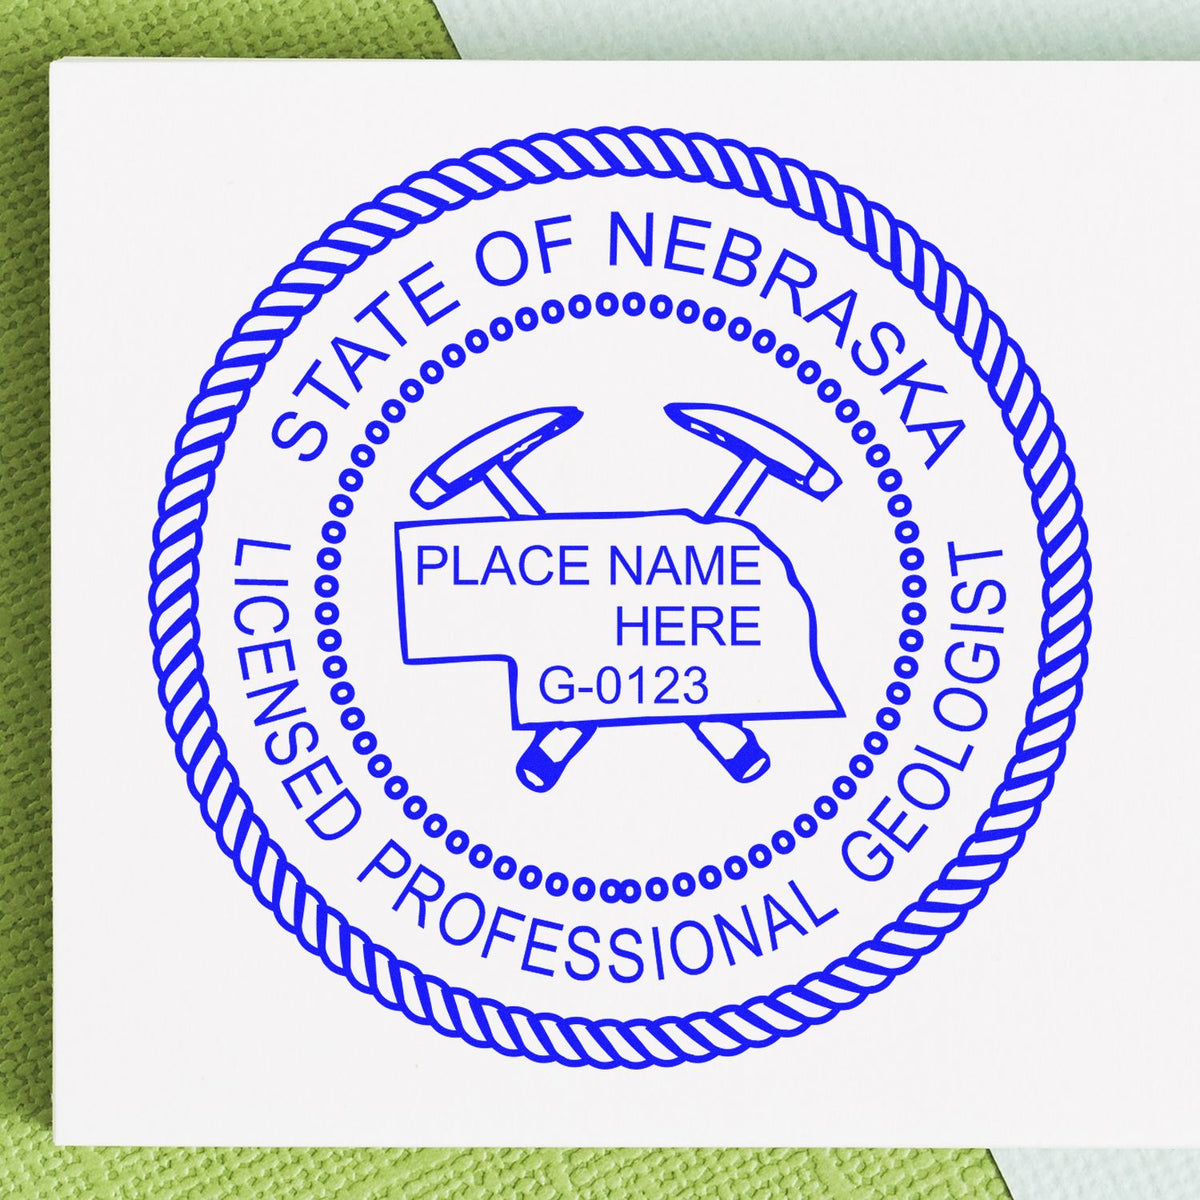 An alternative view of the Self-Inking Nebraska Geologist Stamp stamped on a sheet of paper showing the image in use